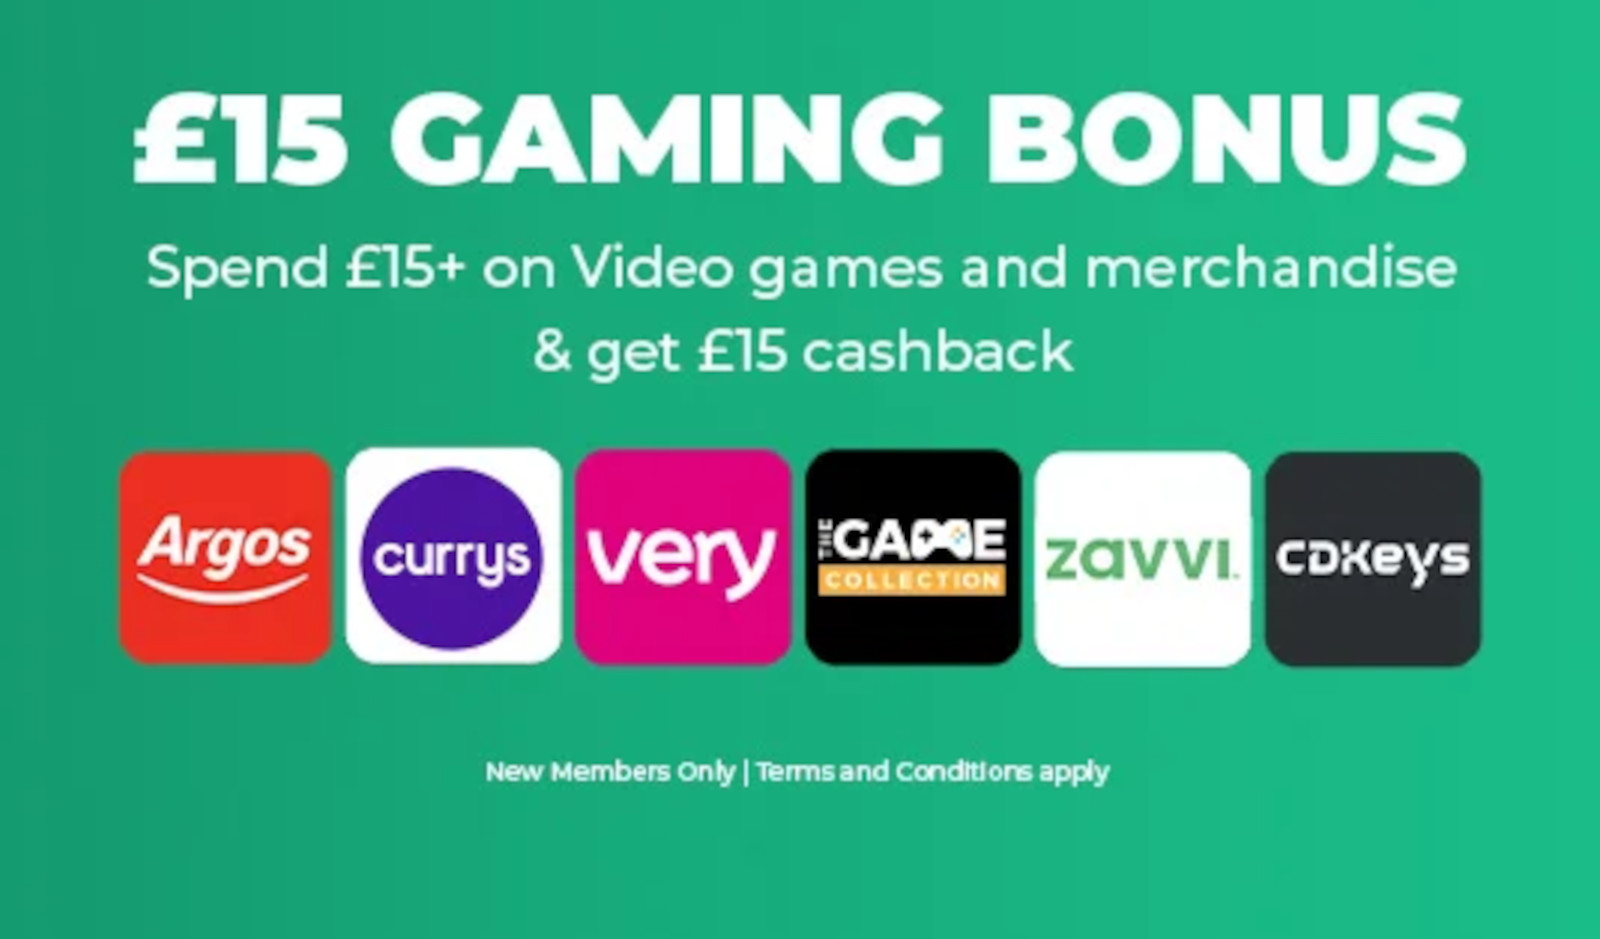 Spend £15+ on Video games and merchandise & get £15 cashback